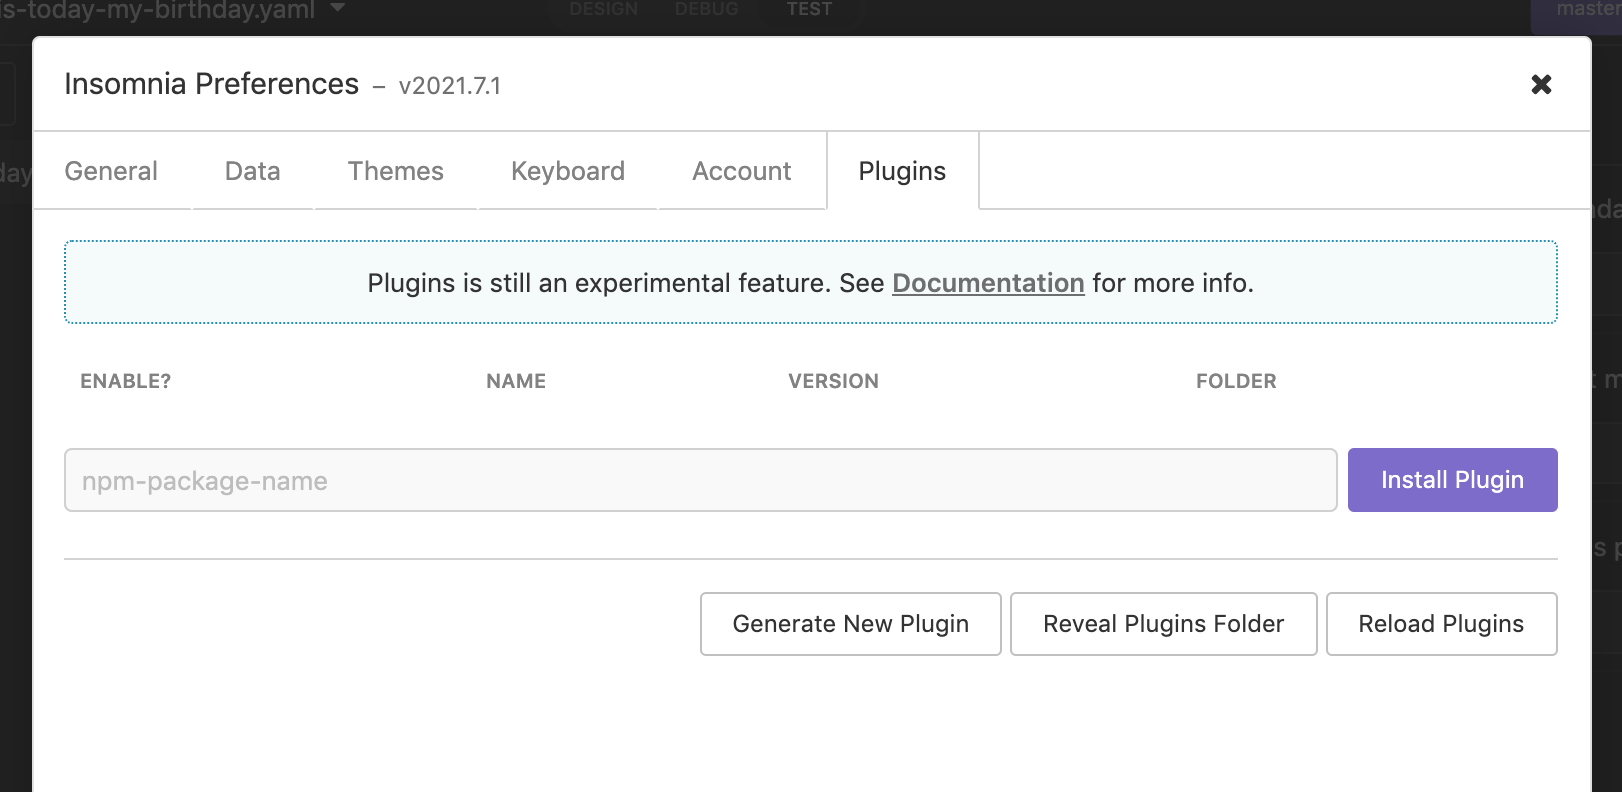 Use the “Generate New Plugin” button to bootstrap your plugin